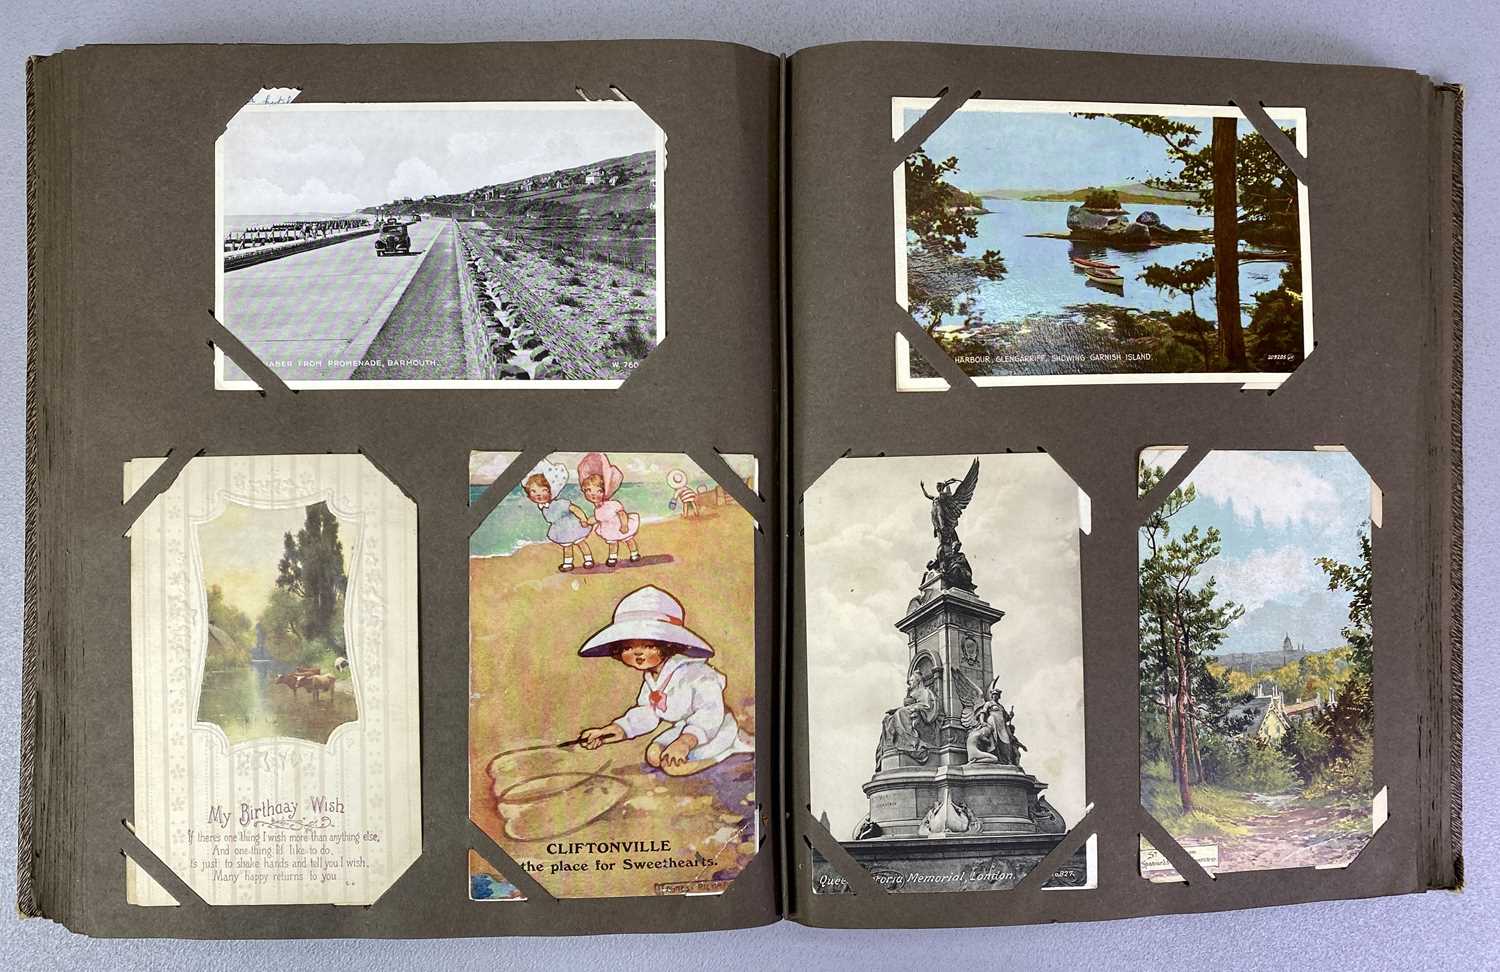 TWO ALBUMS CONTAINING VINTAGE BRITISH POSTCARDS - Foreign and Channel Islands, over 270 in total - Image 7 of 7